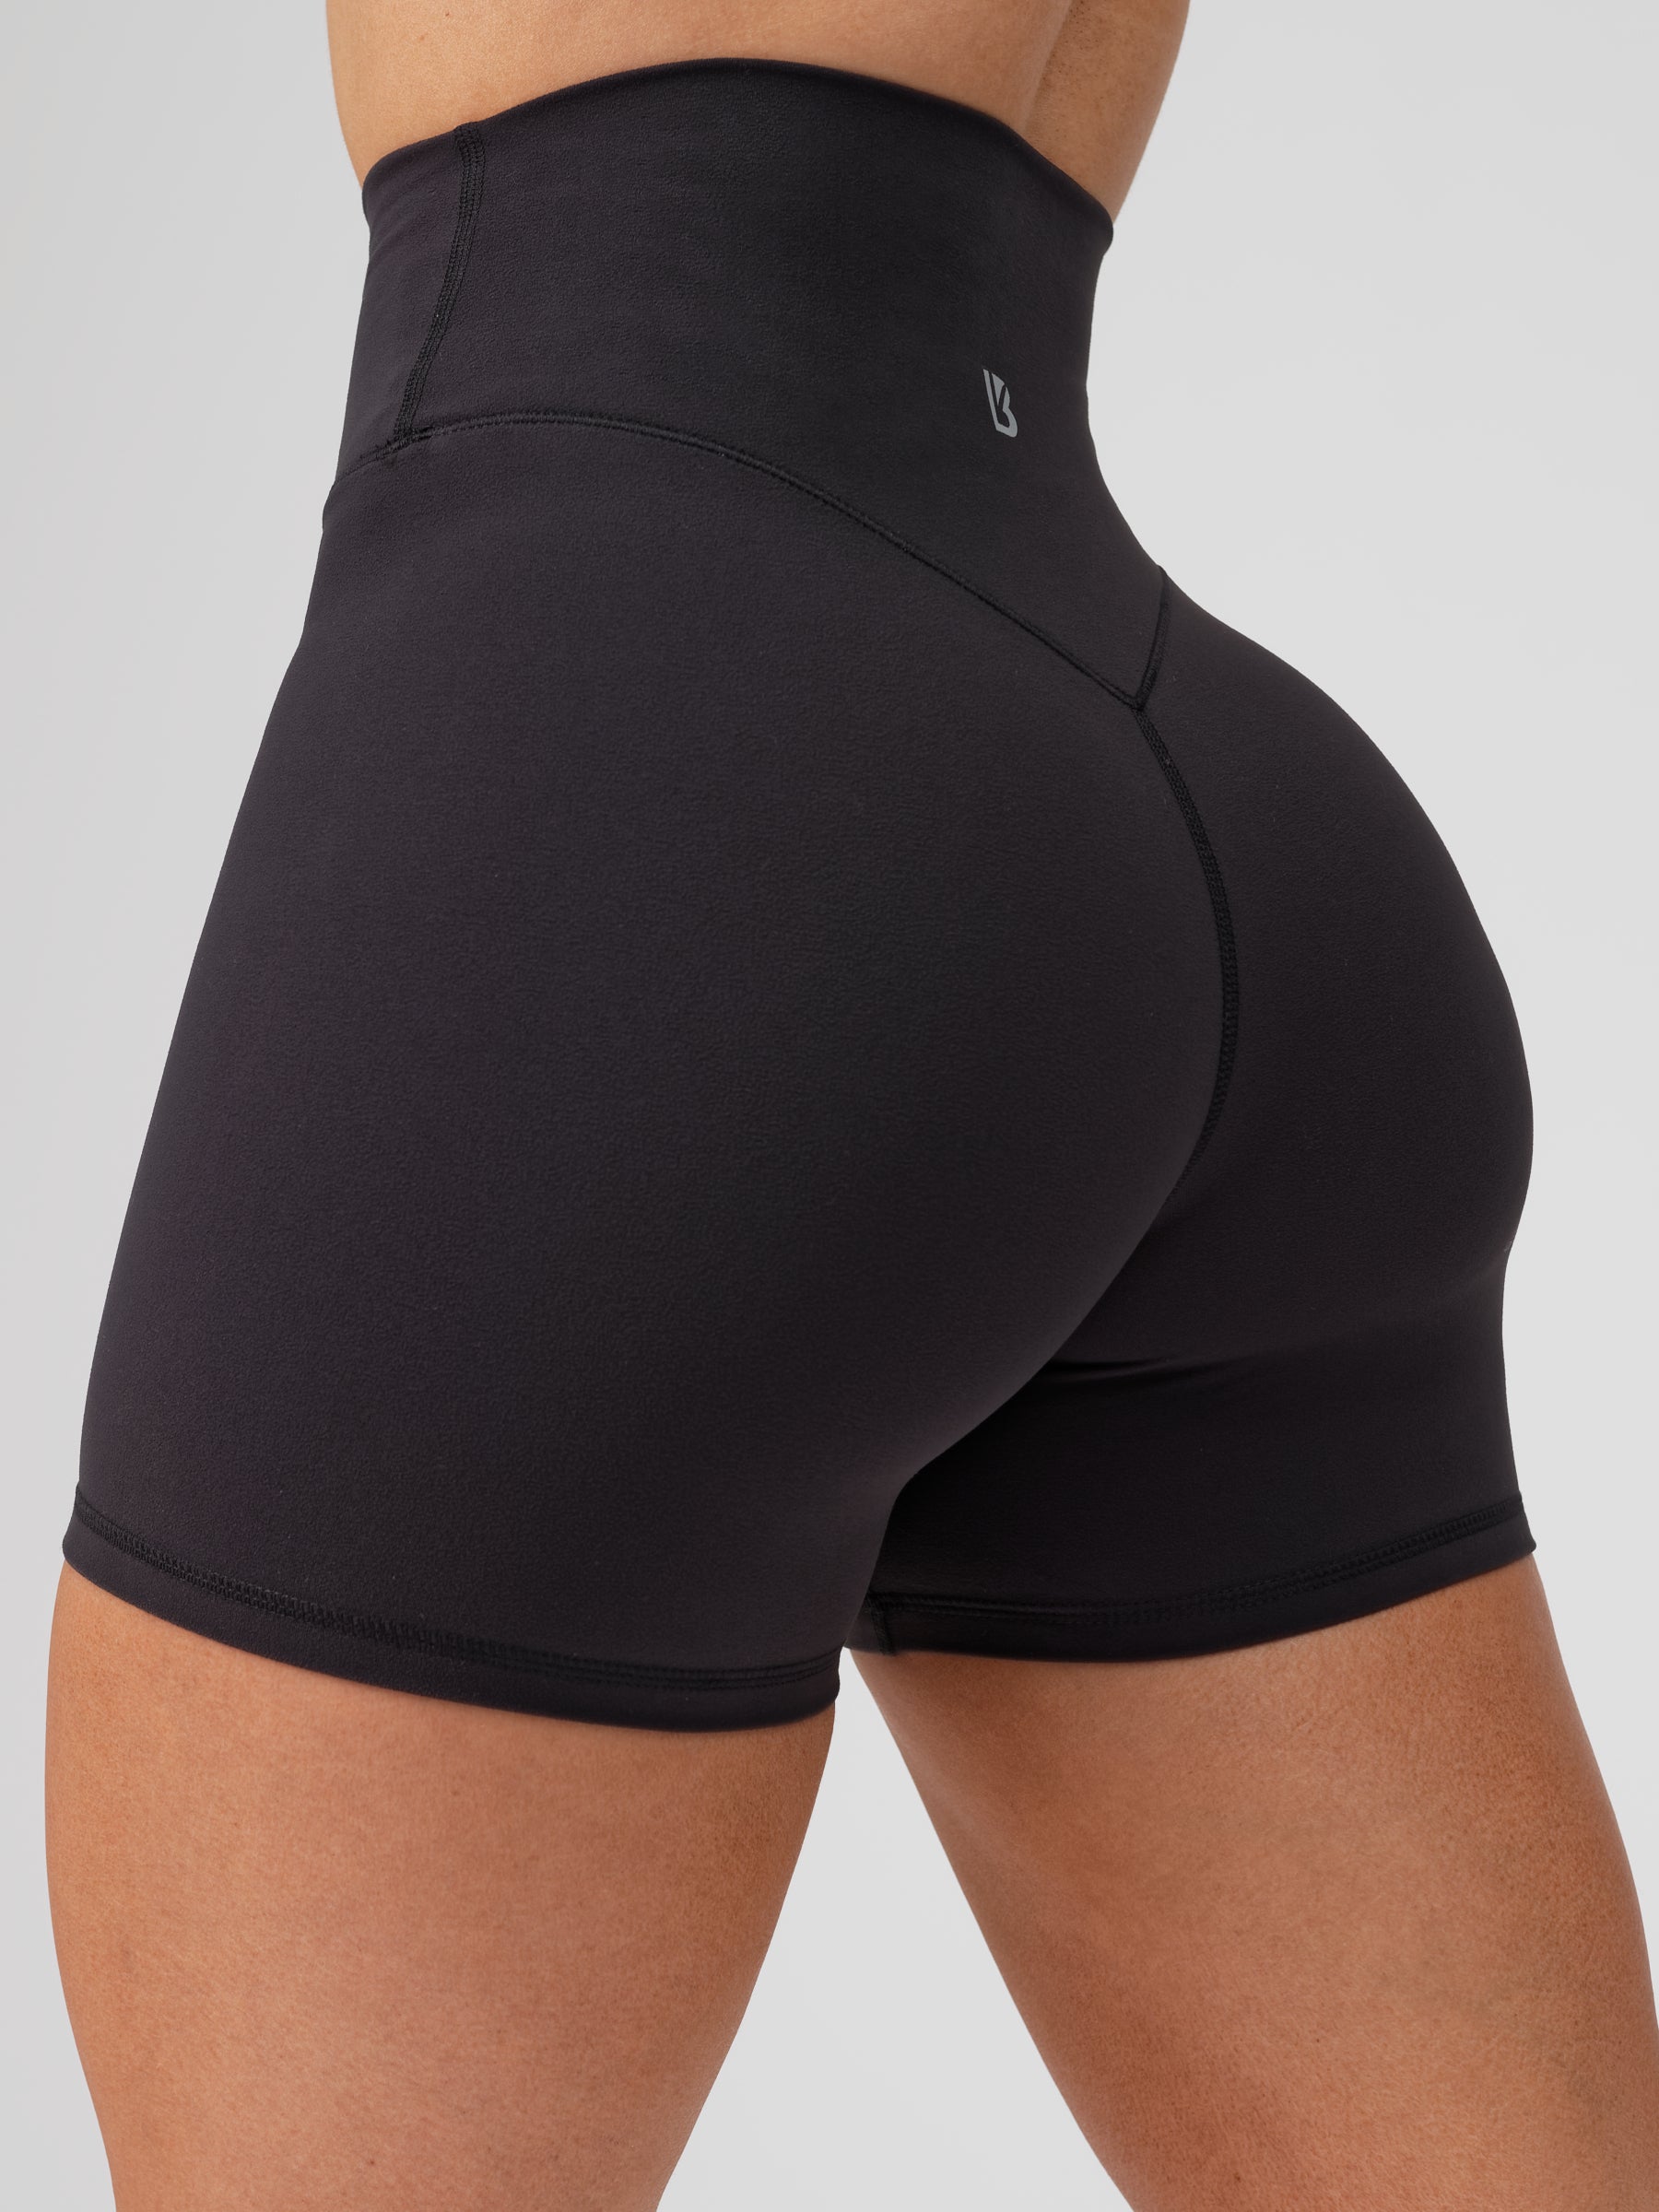 Barely There low-back shaping shorts - Onyx